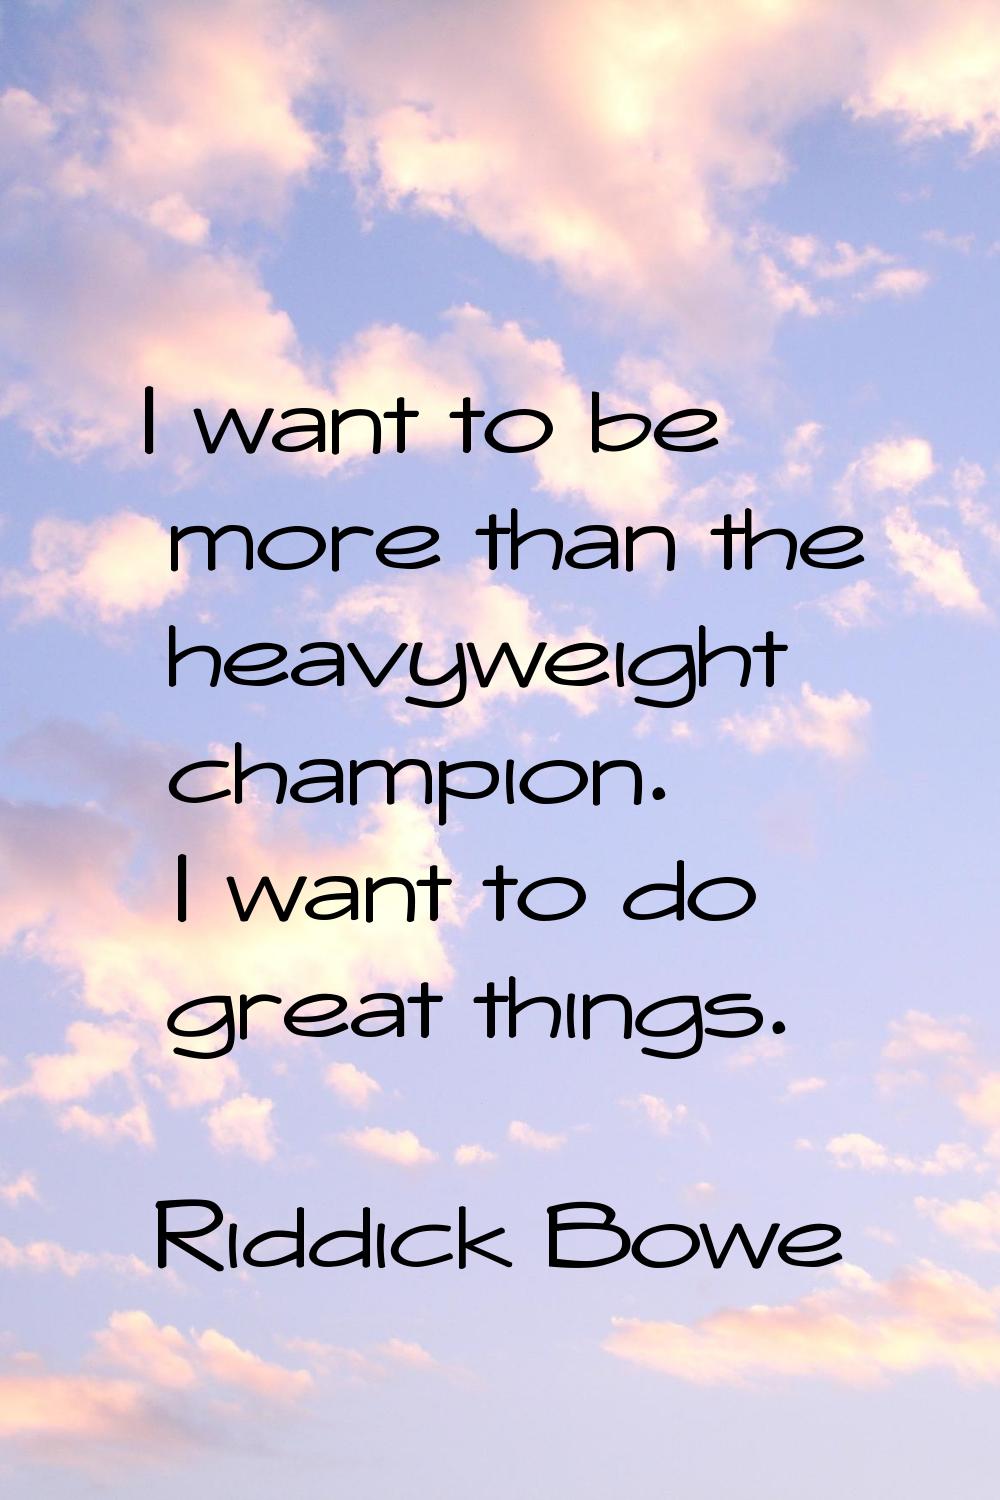 I want to be more than the heavyweight champion. I want to do great things.